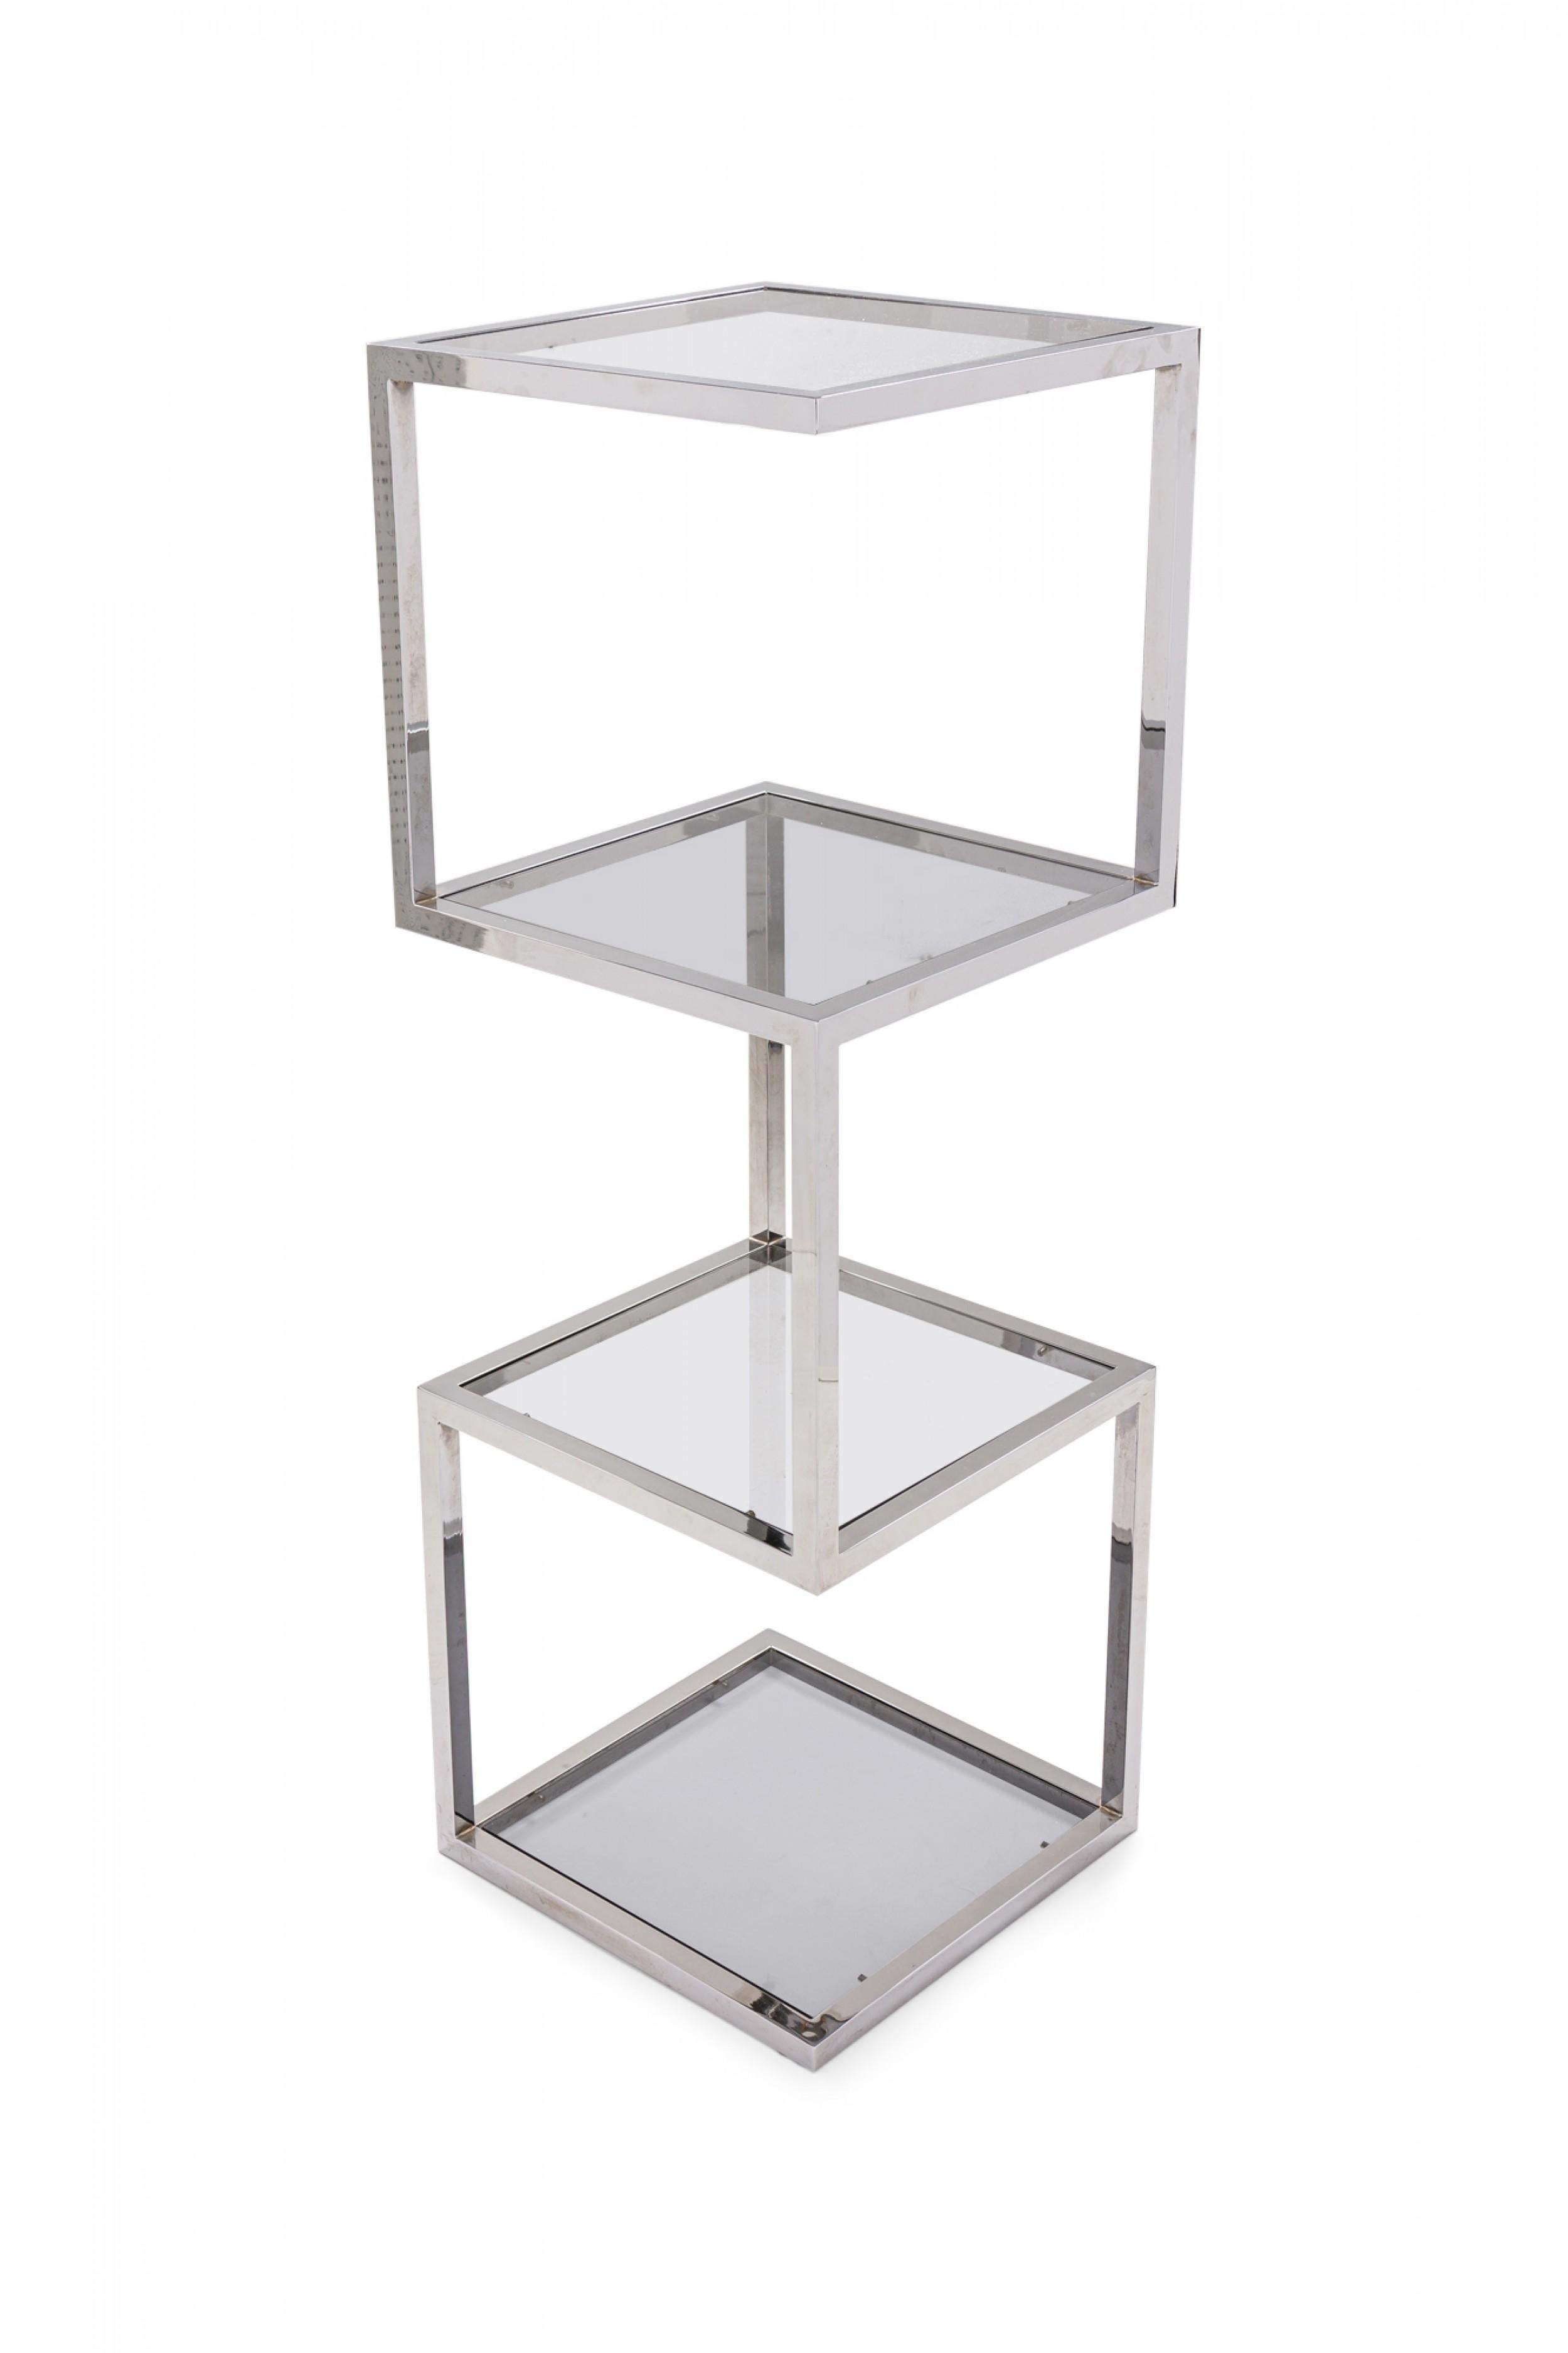 American Polished Chrome-Plated Steel and Smoked Glass Etagere / Display Shelf For Sale